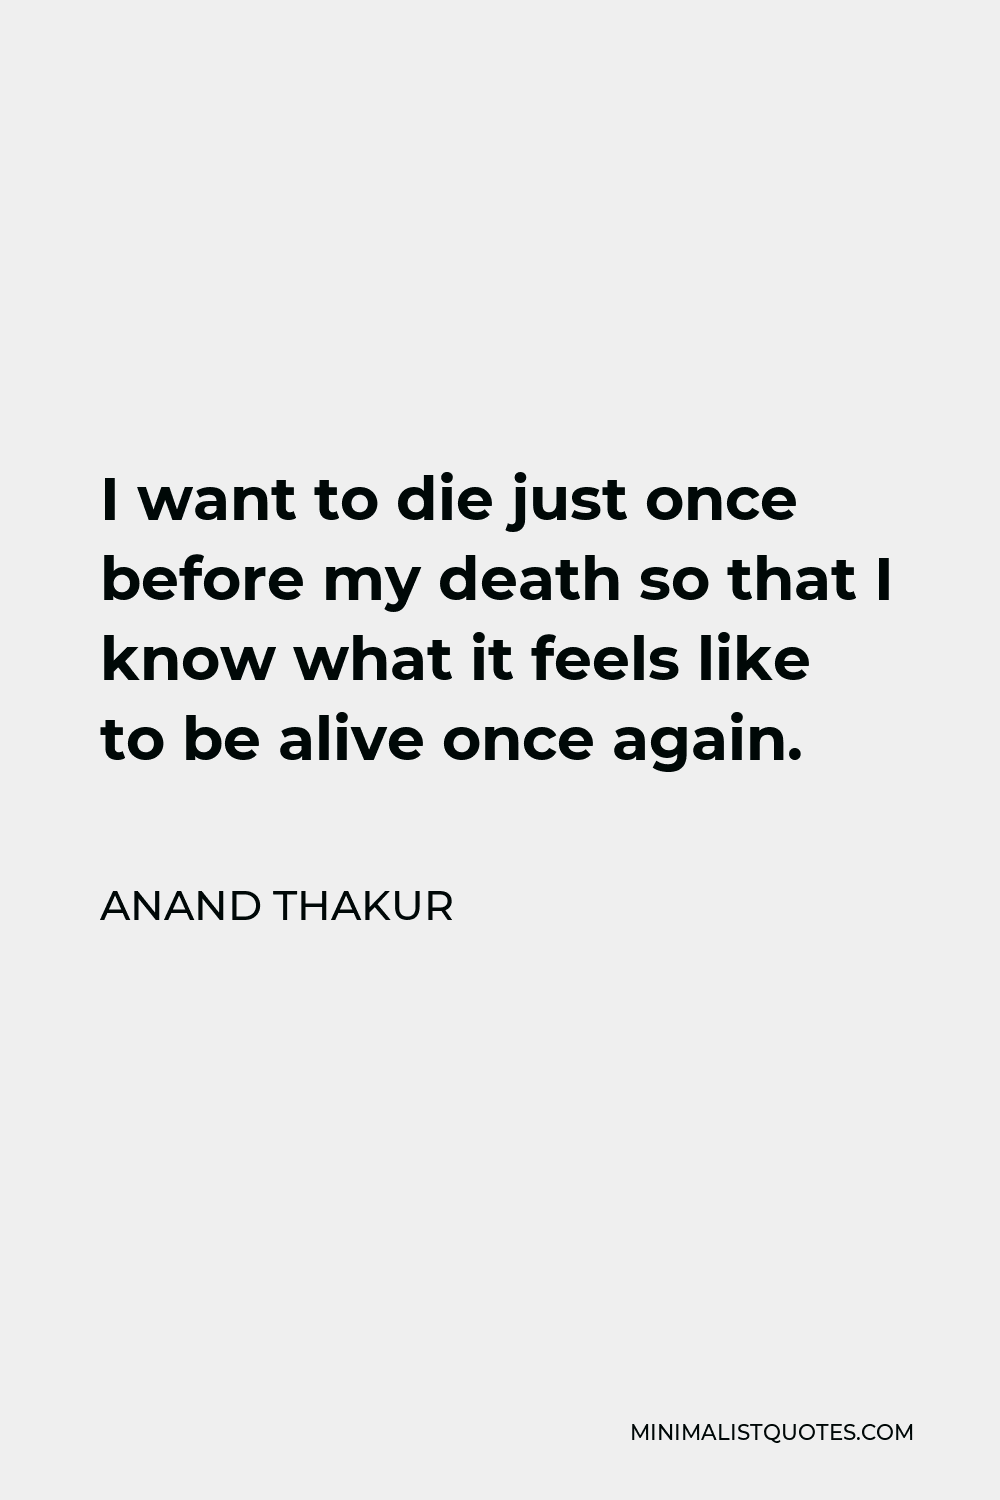 Anand Thakur Quote: I want to die just once before my death so that I ...